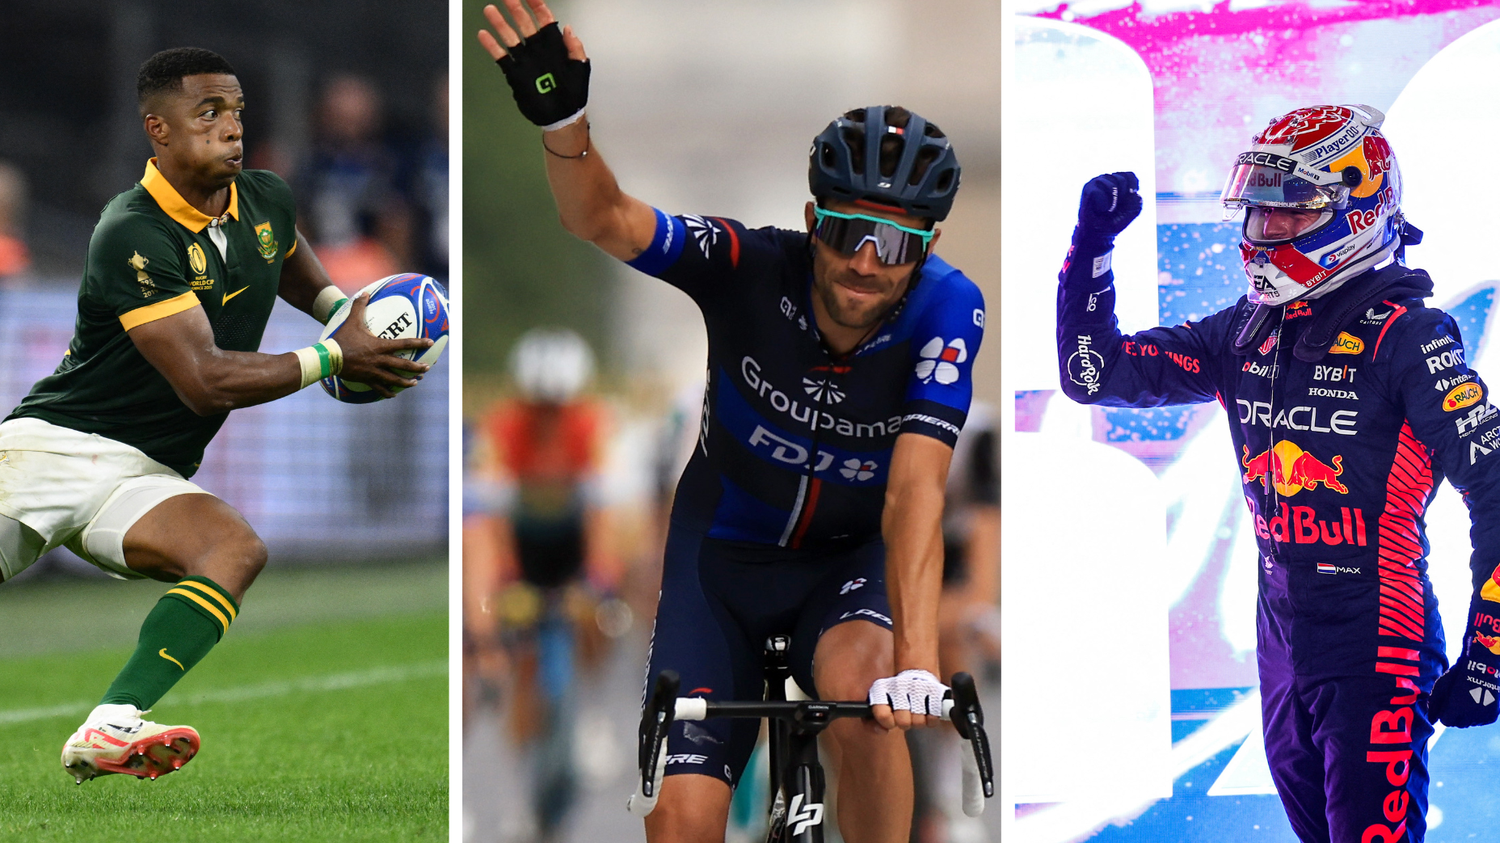 The opponent of the French XV revealed, Thibaut Pinot's last turn, Max Verstappen's early coronation... Sports recap of the weekend